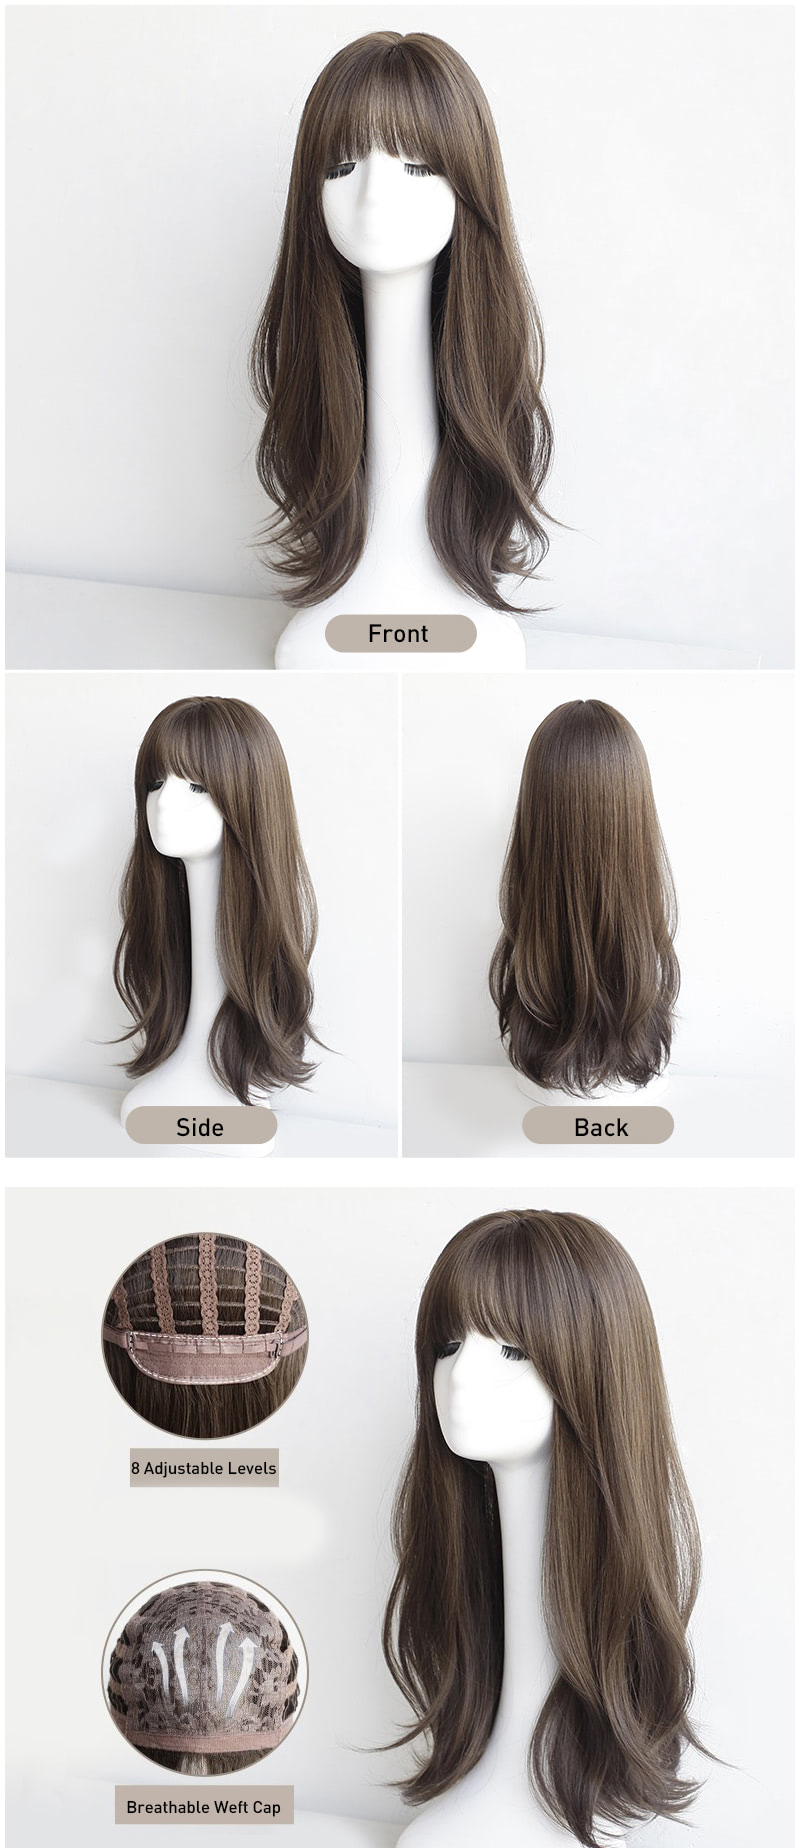 Women-Sweet-and-Fashion-Natural-Cool-Brown-Mid-length-Wigs08.jpg